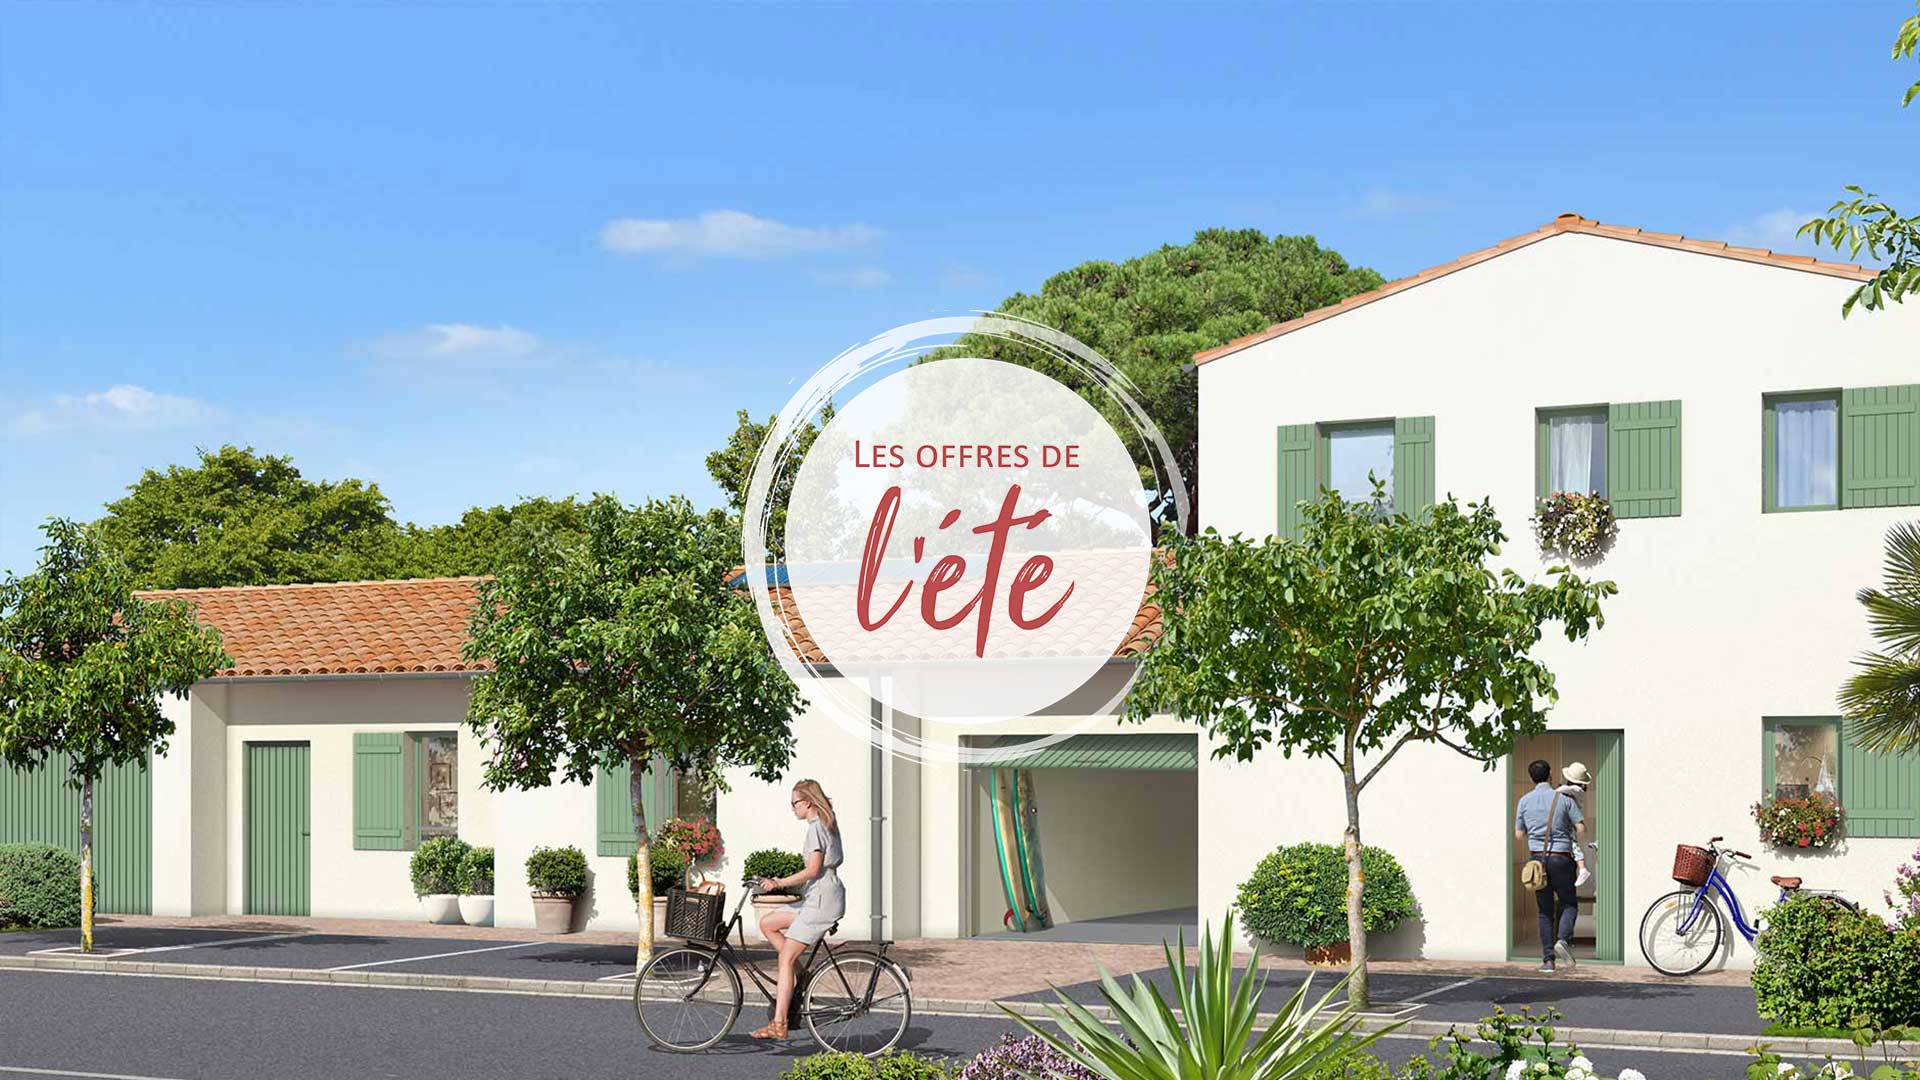 VISUELprogramme-immobilier-neuf-prochainement-stgeorges-oleron-offres.jpg